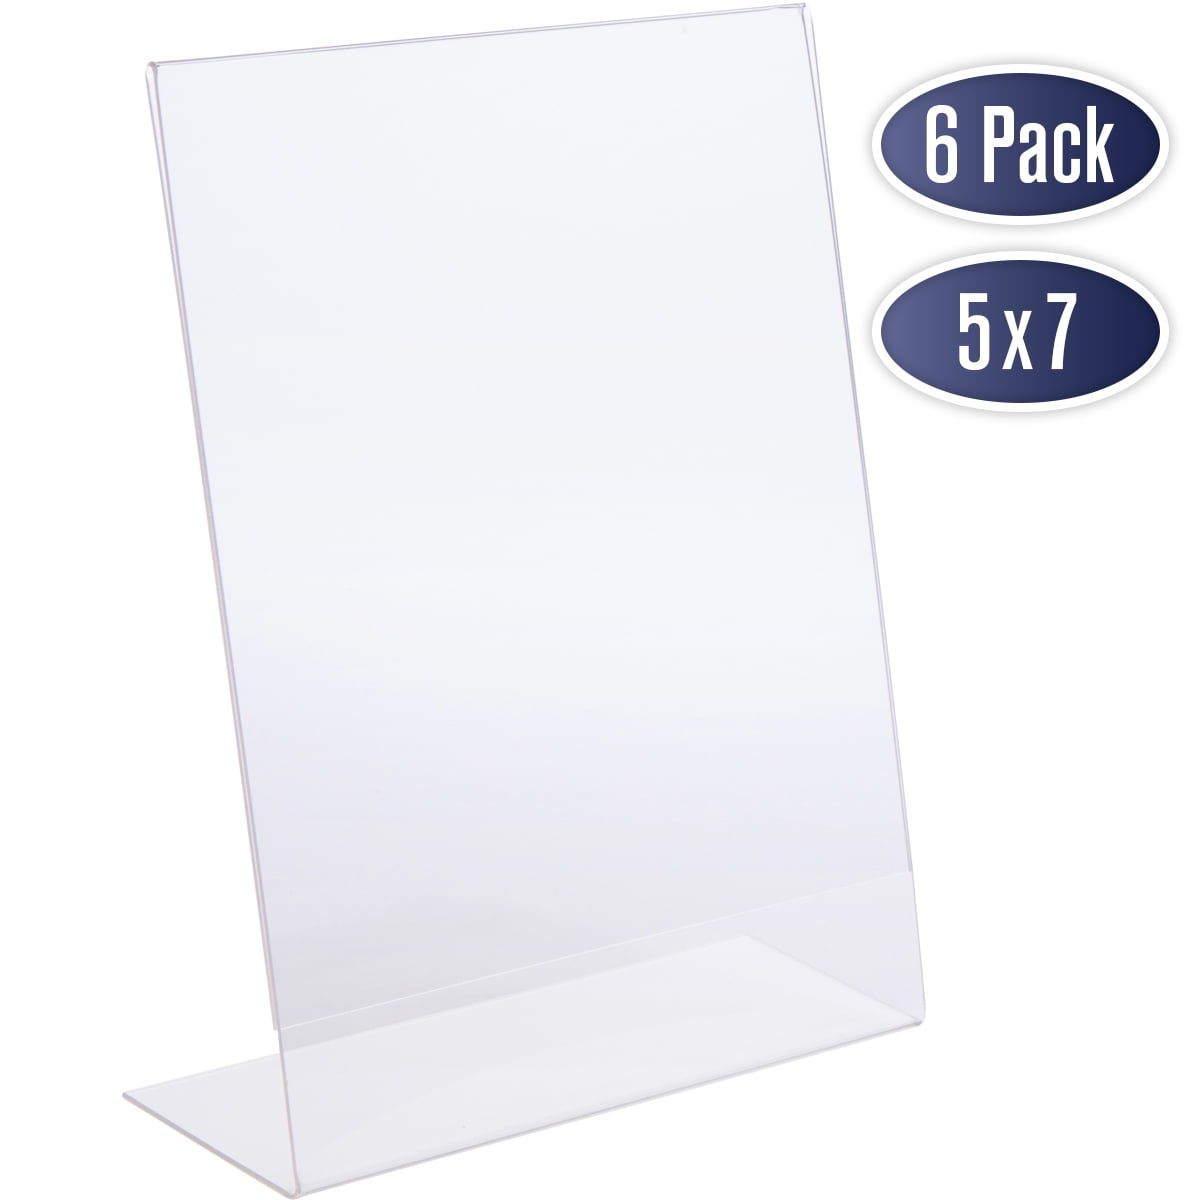 5”W x 7”H Table Sign Holder Ad Display Frame Restaurant Table Tent Qty 50